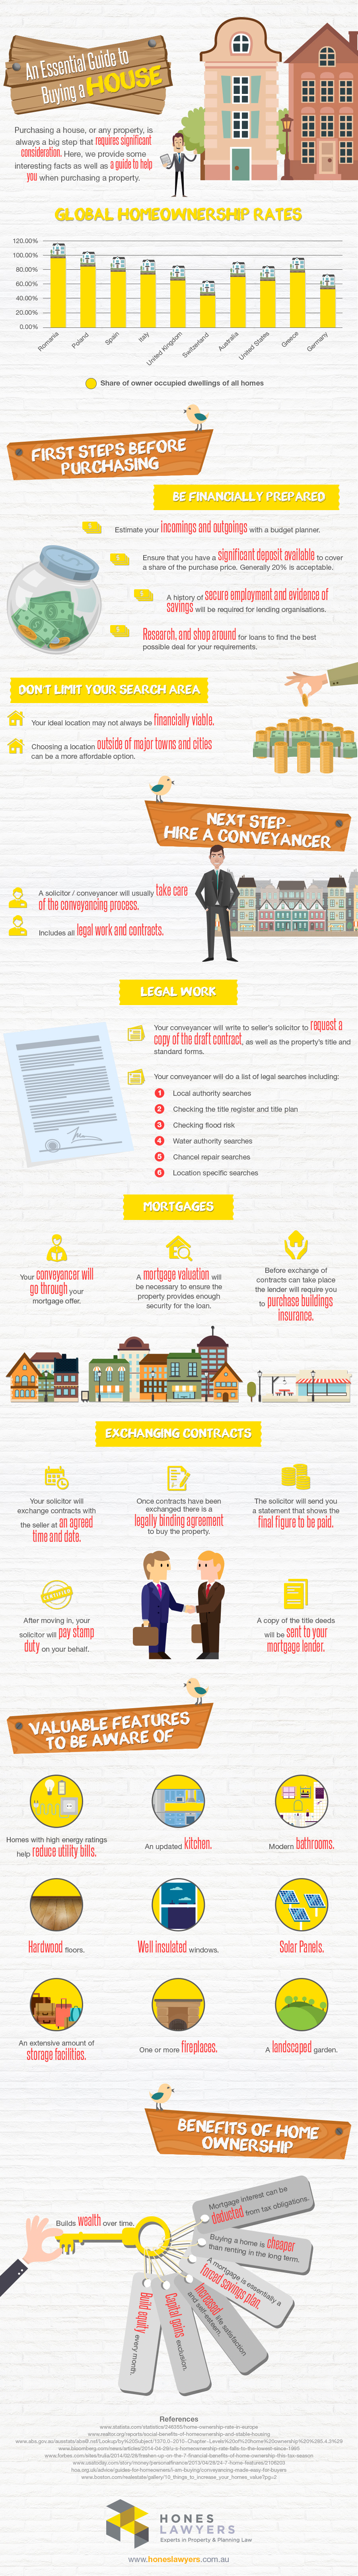 An Essential Guide to Buying a House